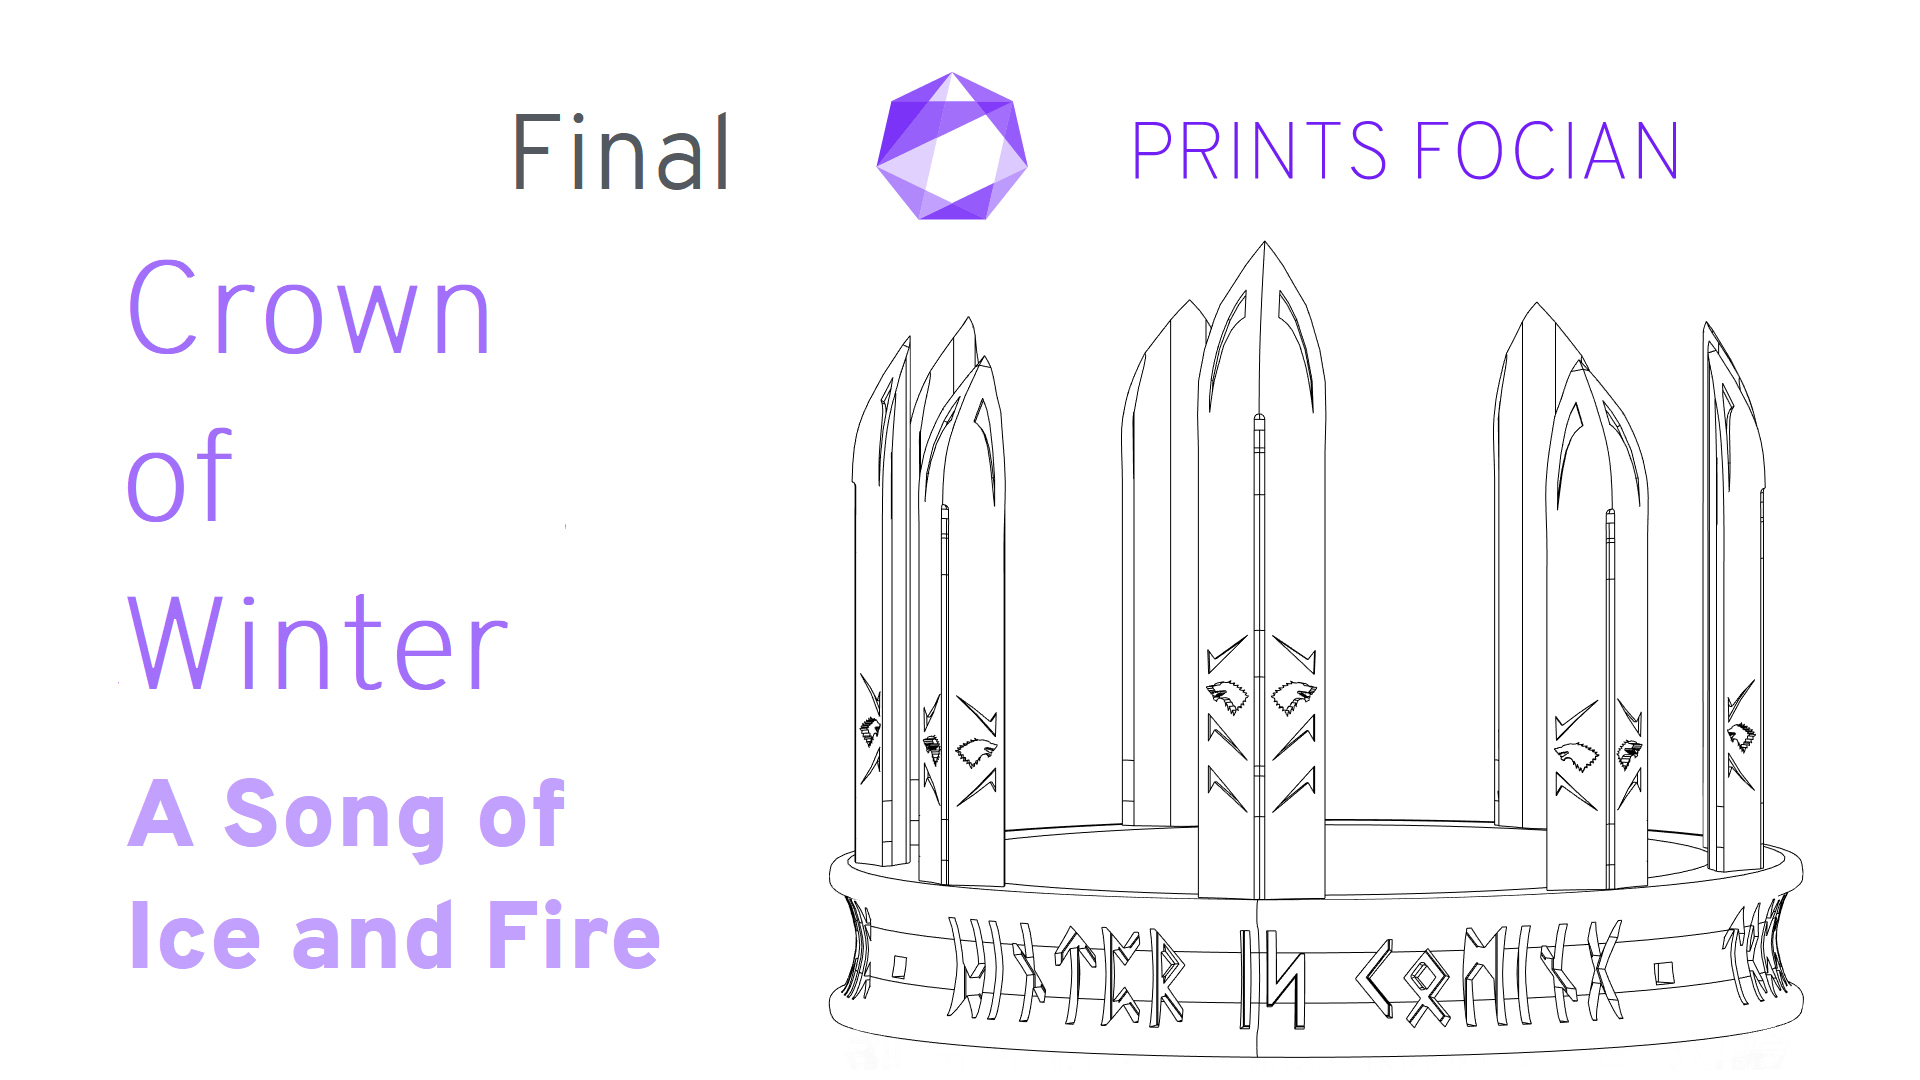 Wireframe image of the Crown of WInter on a white background. Prints Focian Icon top and central. Text: Purple Prints Focian, Crown of Winter, A Song of Ice and Fire and dark grey Final